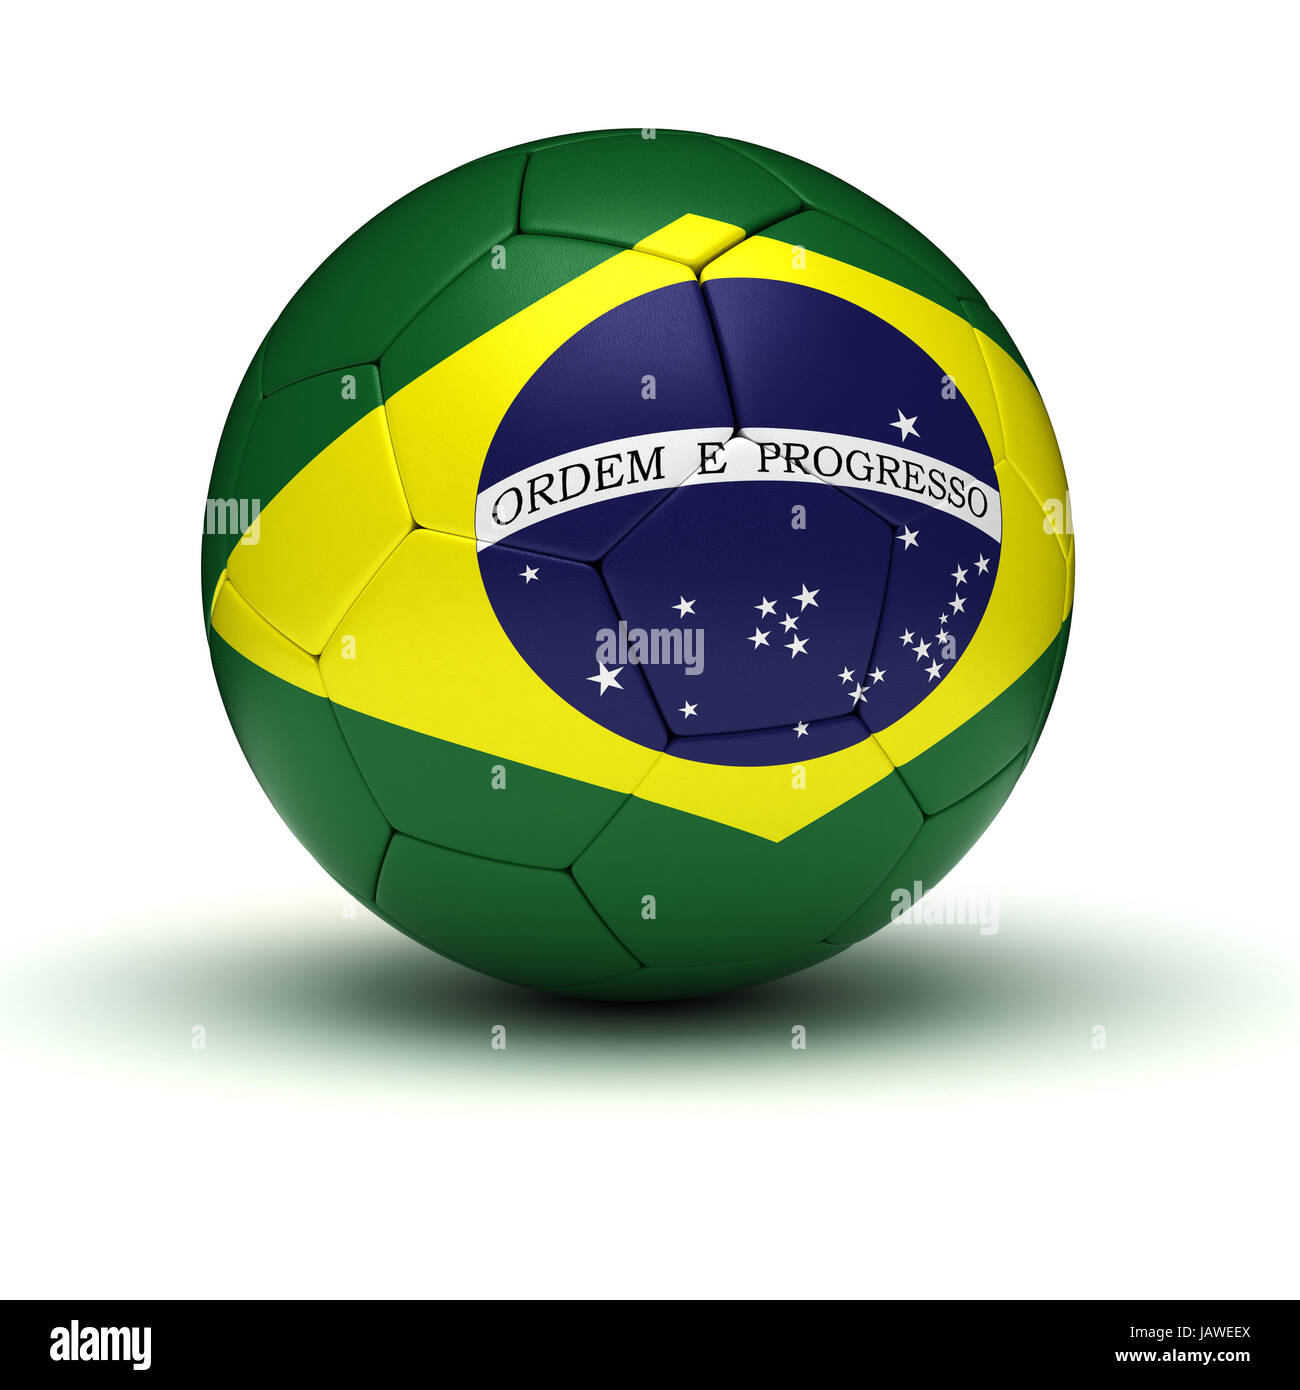 2014 brazilian world cup team Cut Out Stock Images & Pictures - Alamy